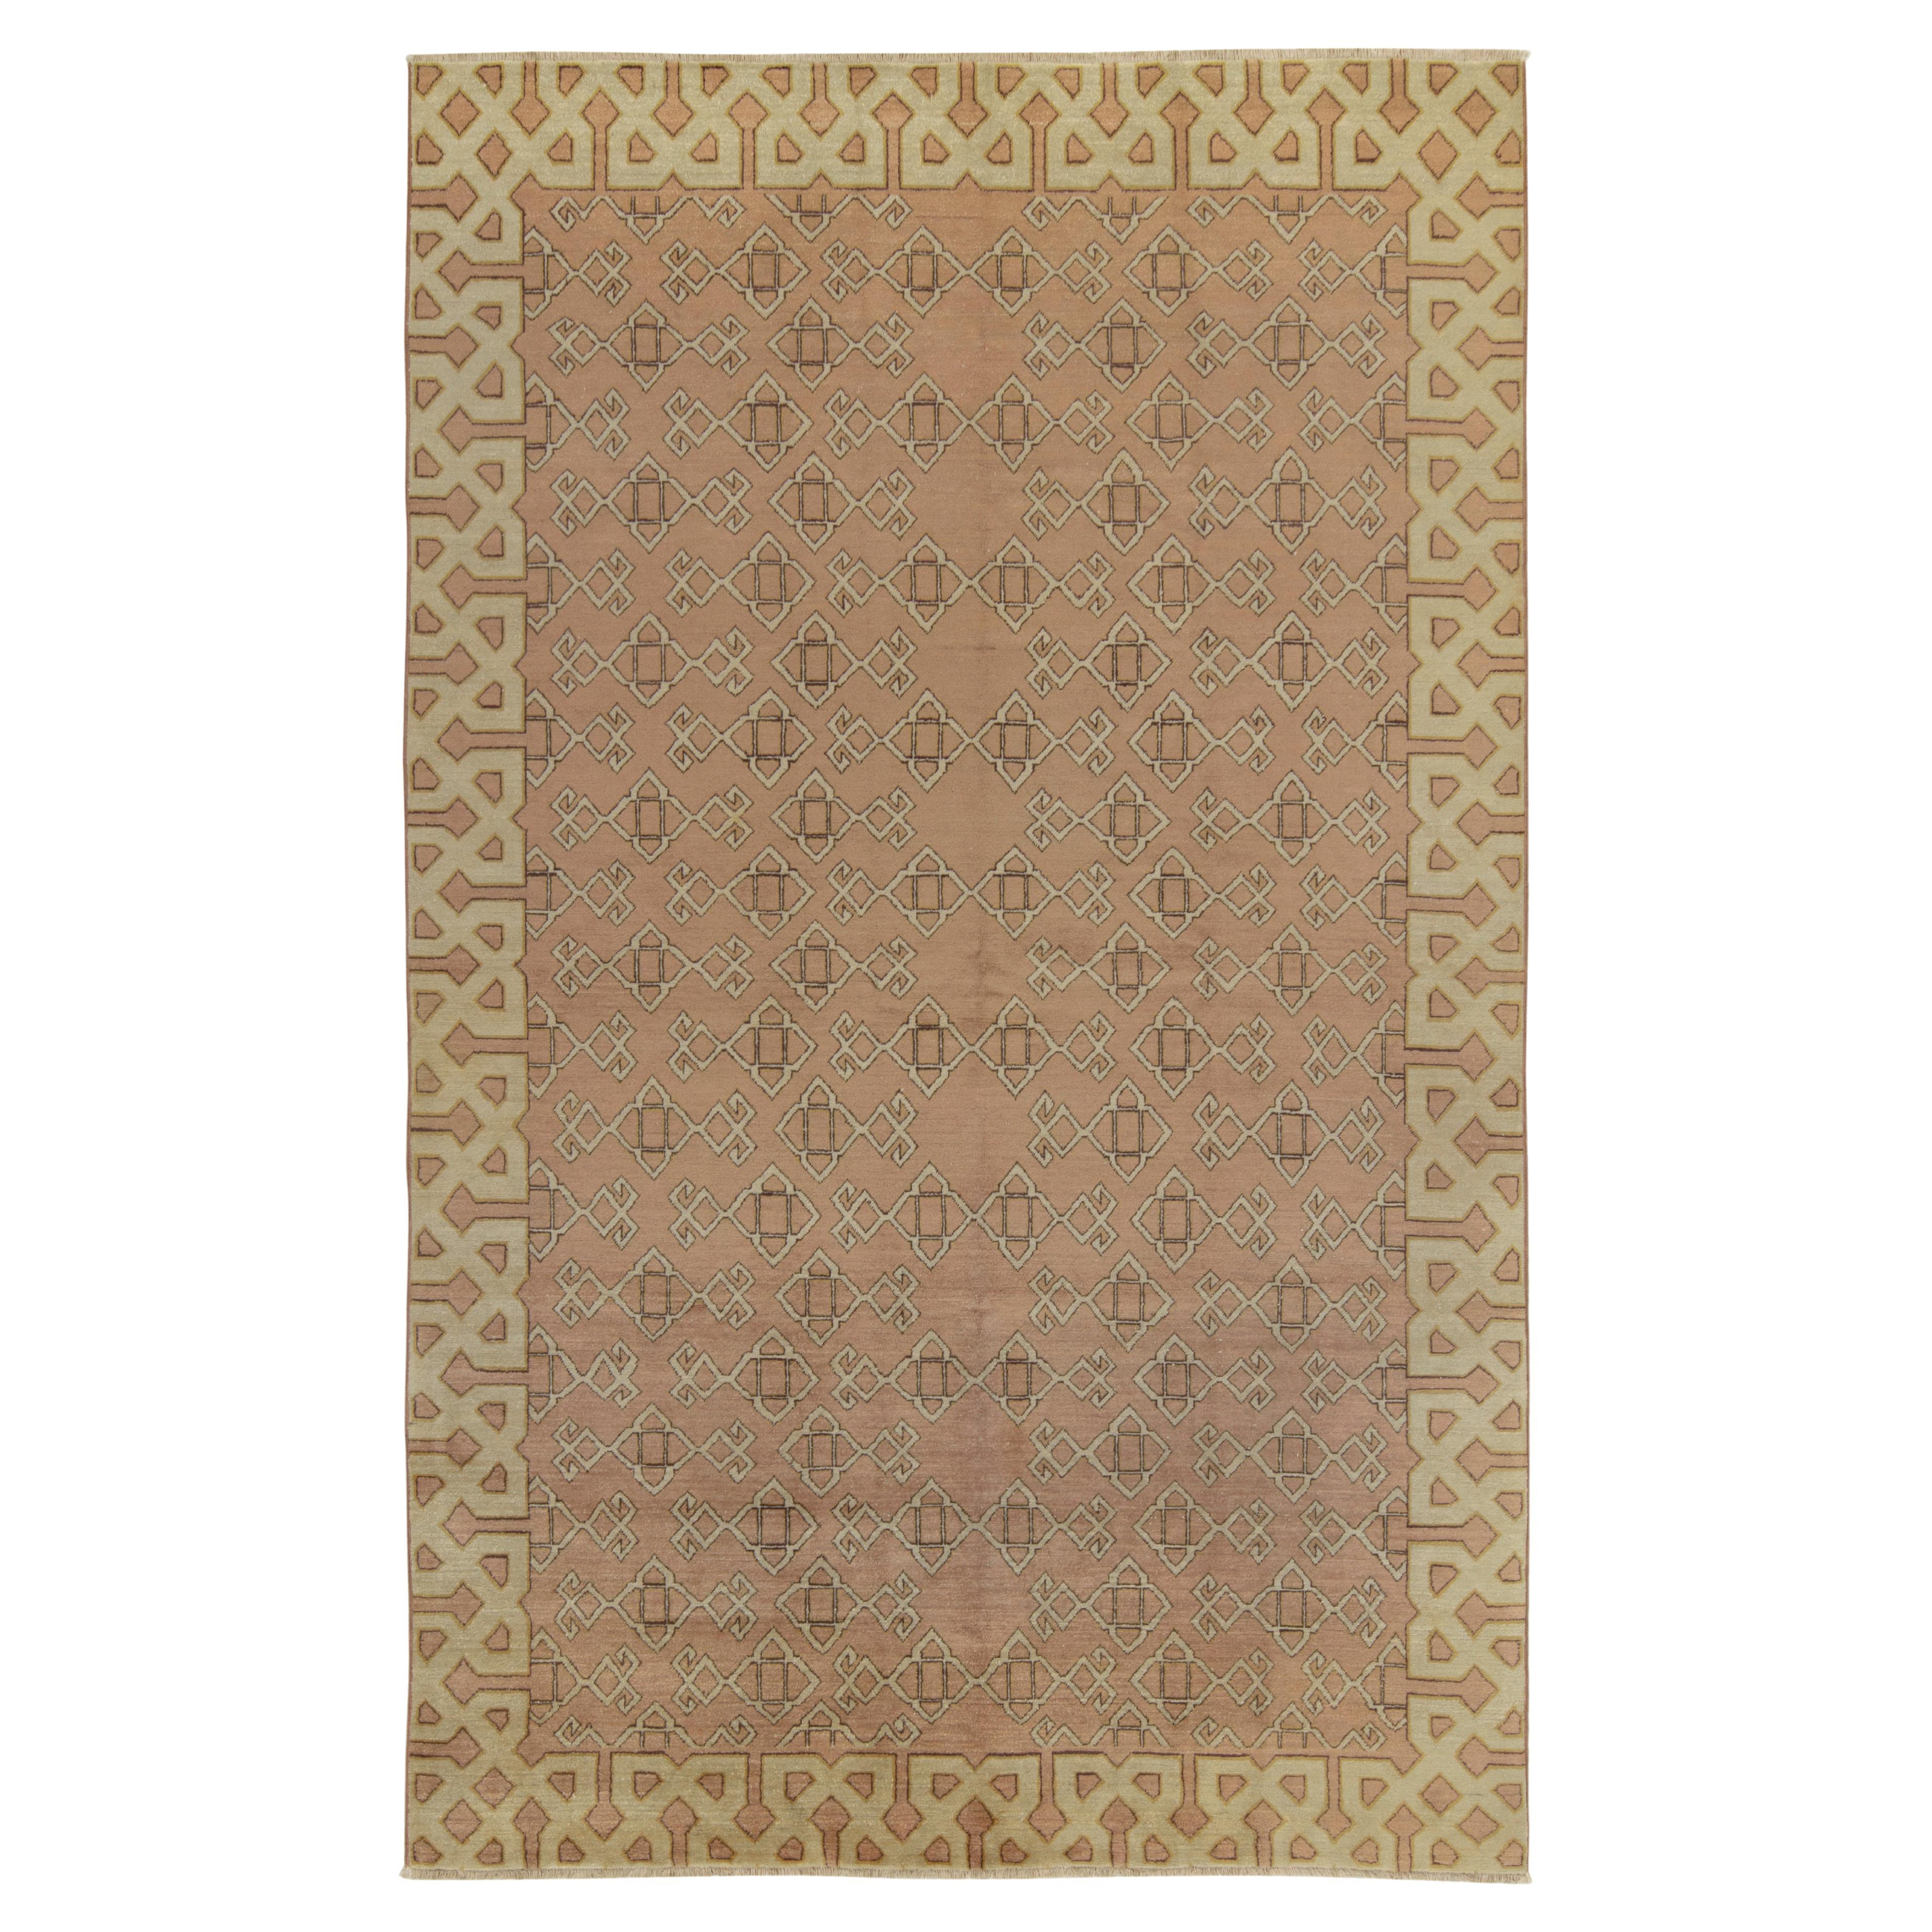 1960s Hand-Knotted Vintage Rug in Beige-Brown Geometric Pattern by Rug & Kilim For Sale